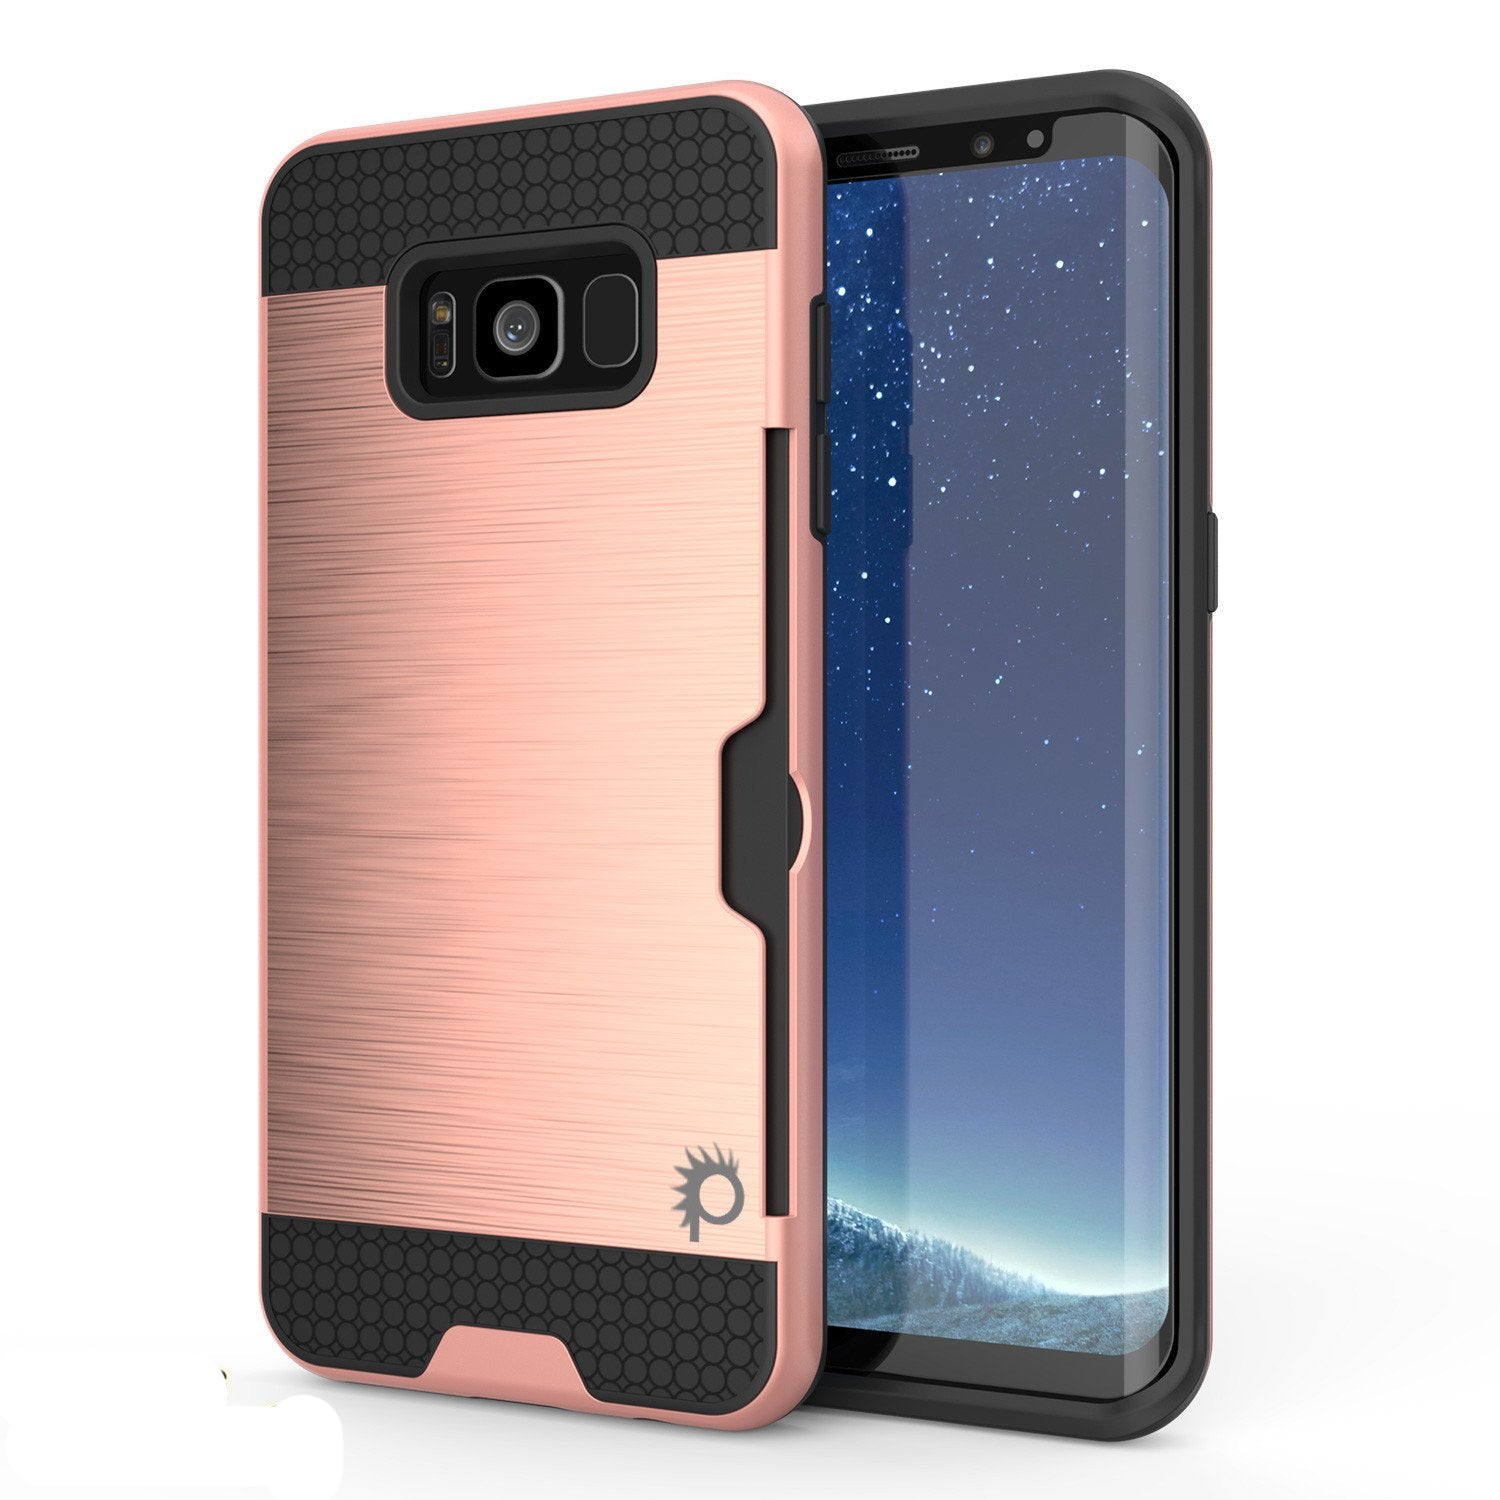 Galaxy S8 Case, PUNKcase [SLOT Series] [Slim Fit] Dual-Layer Armor Cover w/Integrated Anti-Shock System, Credit Card Slot [Rose Gold] (Color in image: Rose)